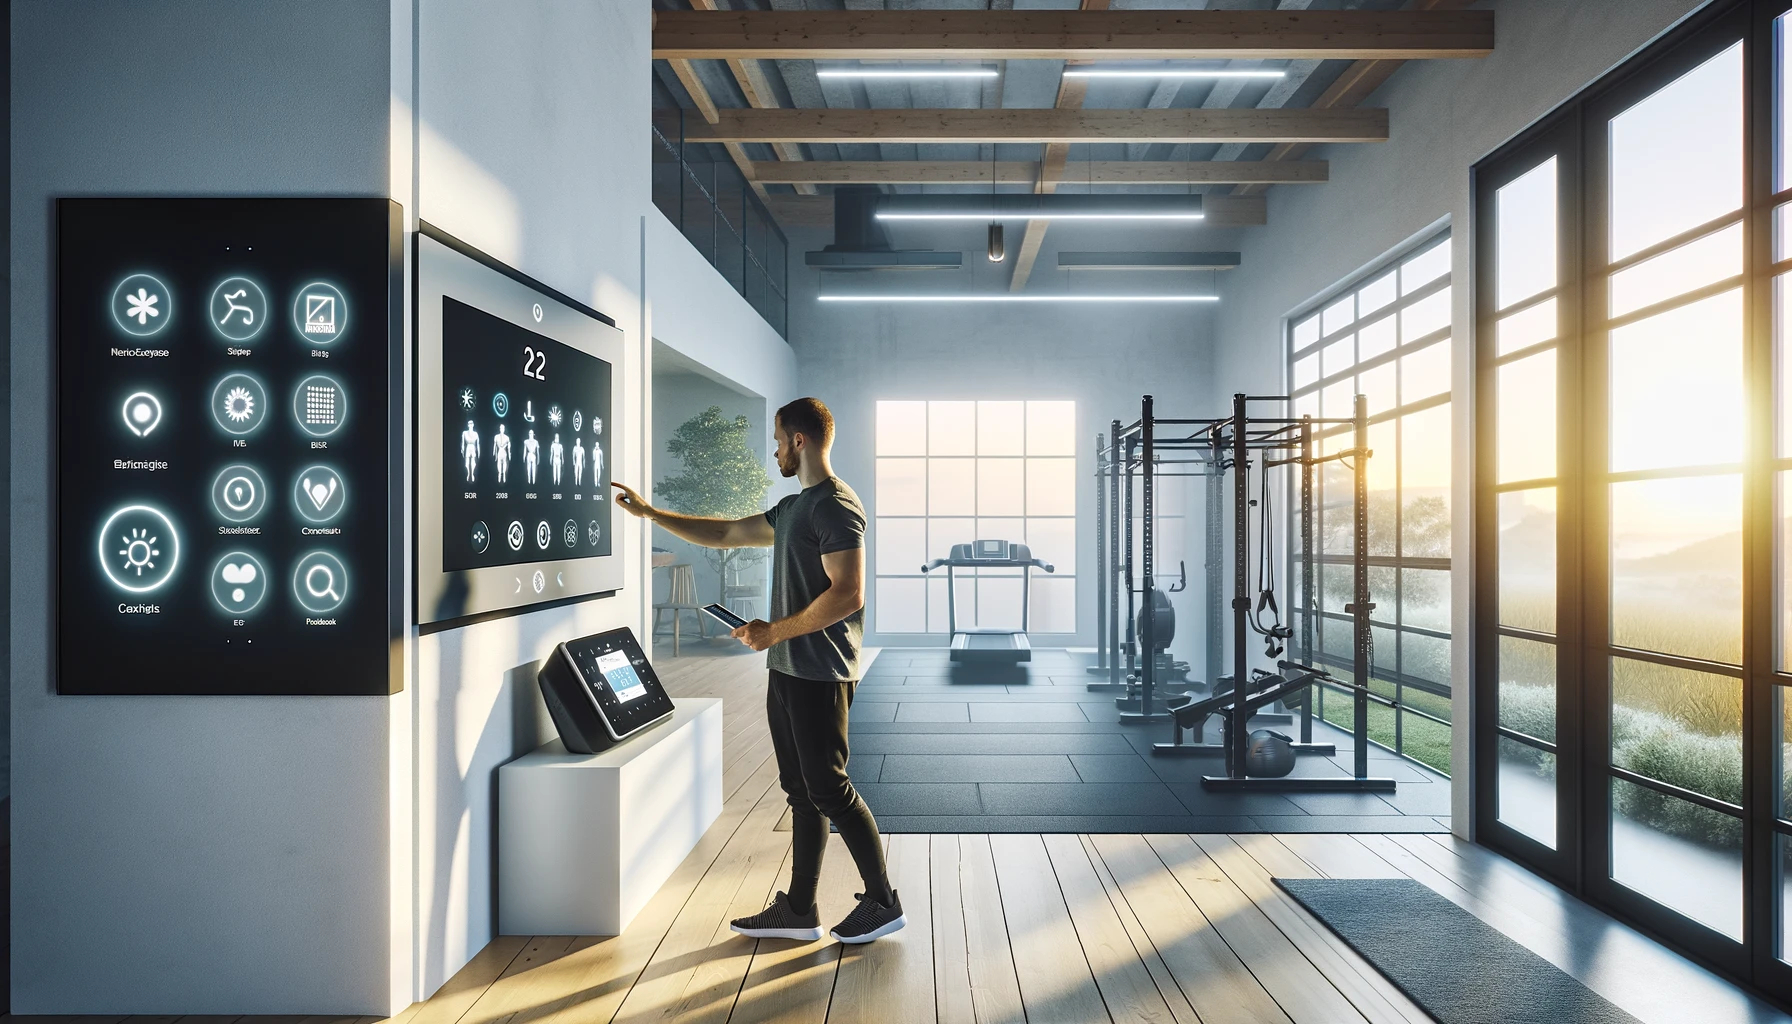 Man interacting with smart home gym interface.